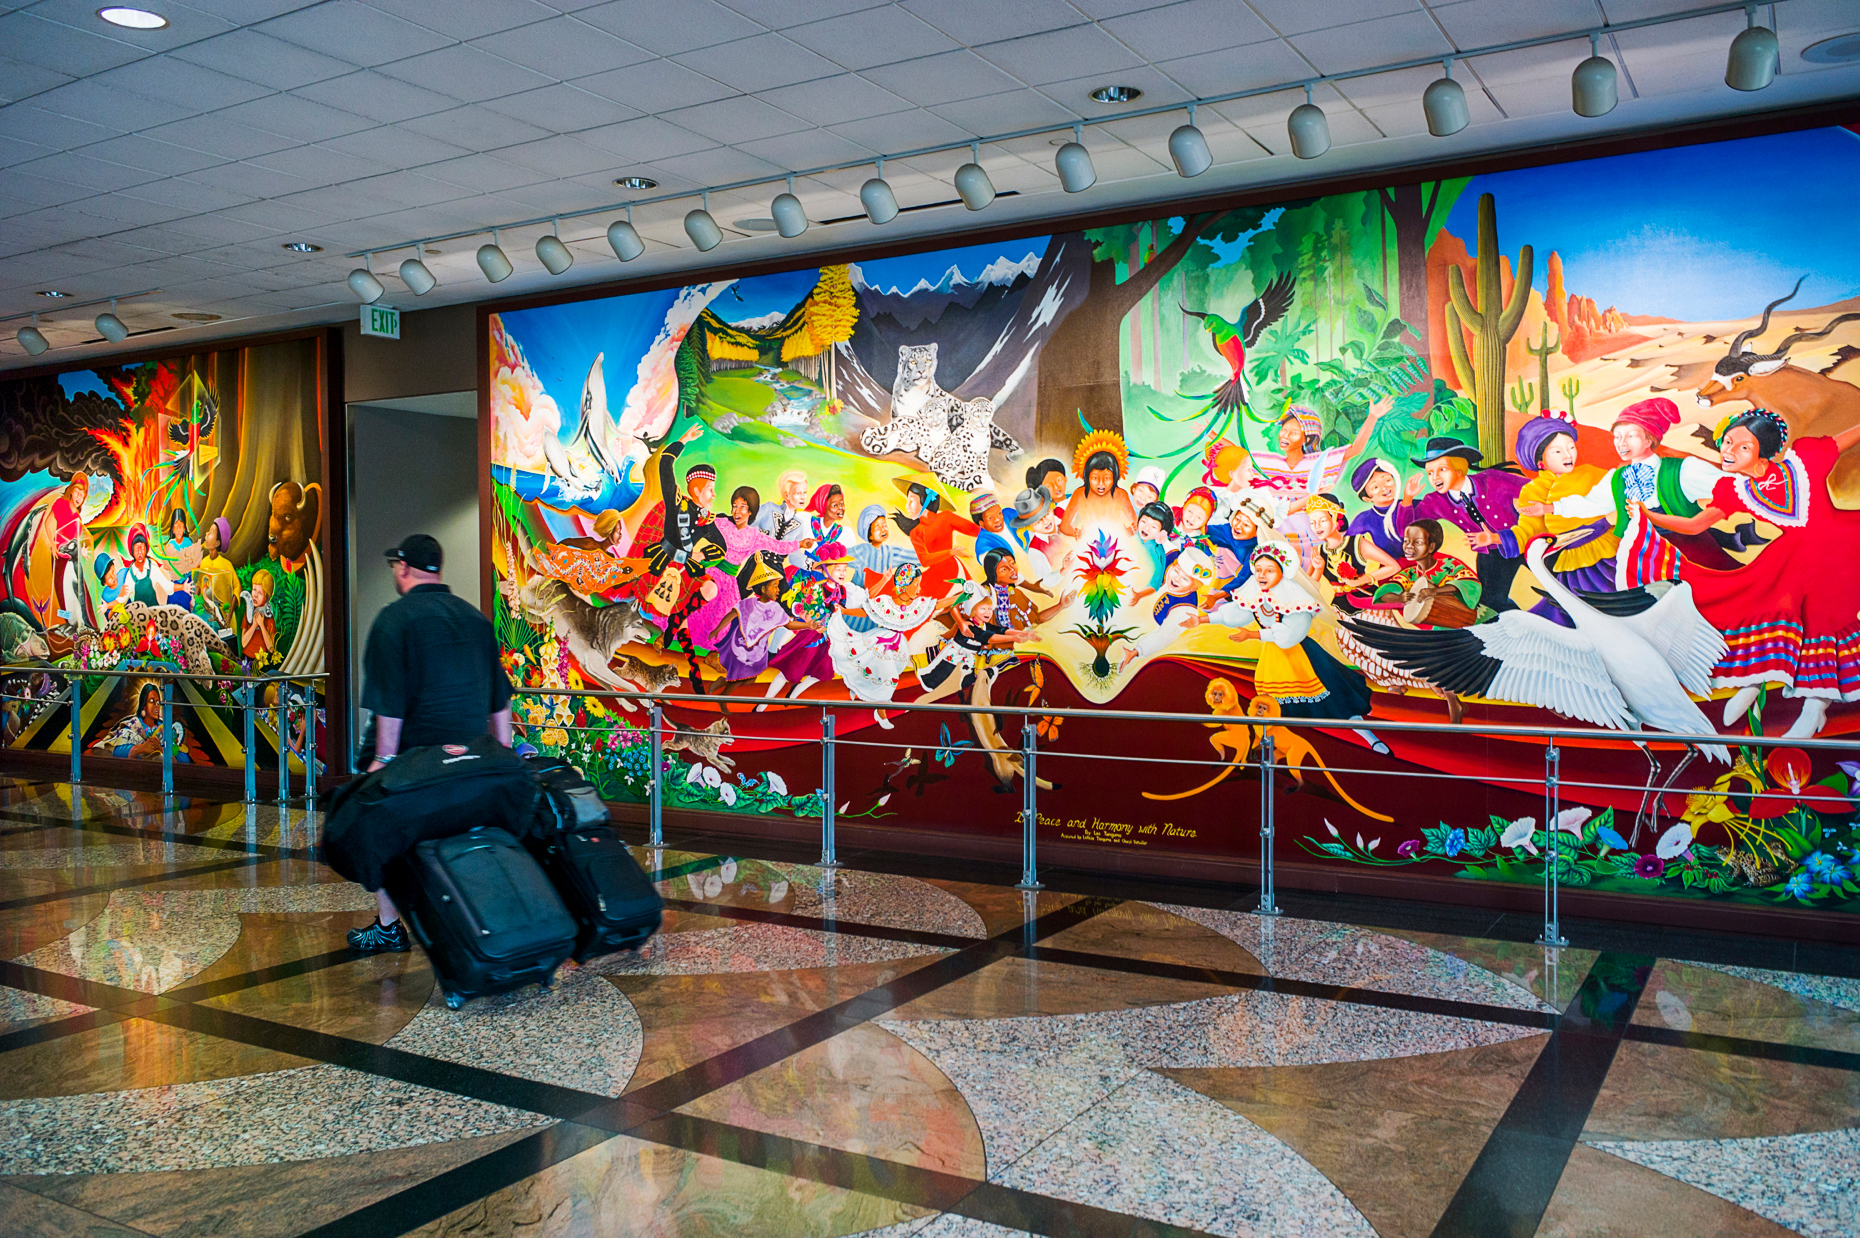 Colorful mural titled "In Peace & Harmony with Nature", by Leo Tanguma, Denver International Airport, Colorado, USA